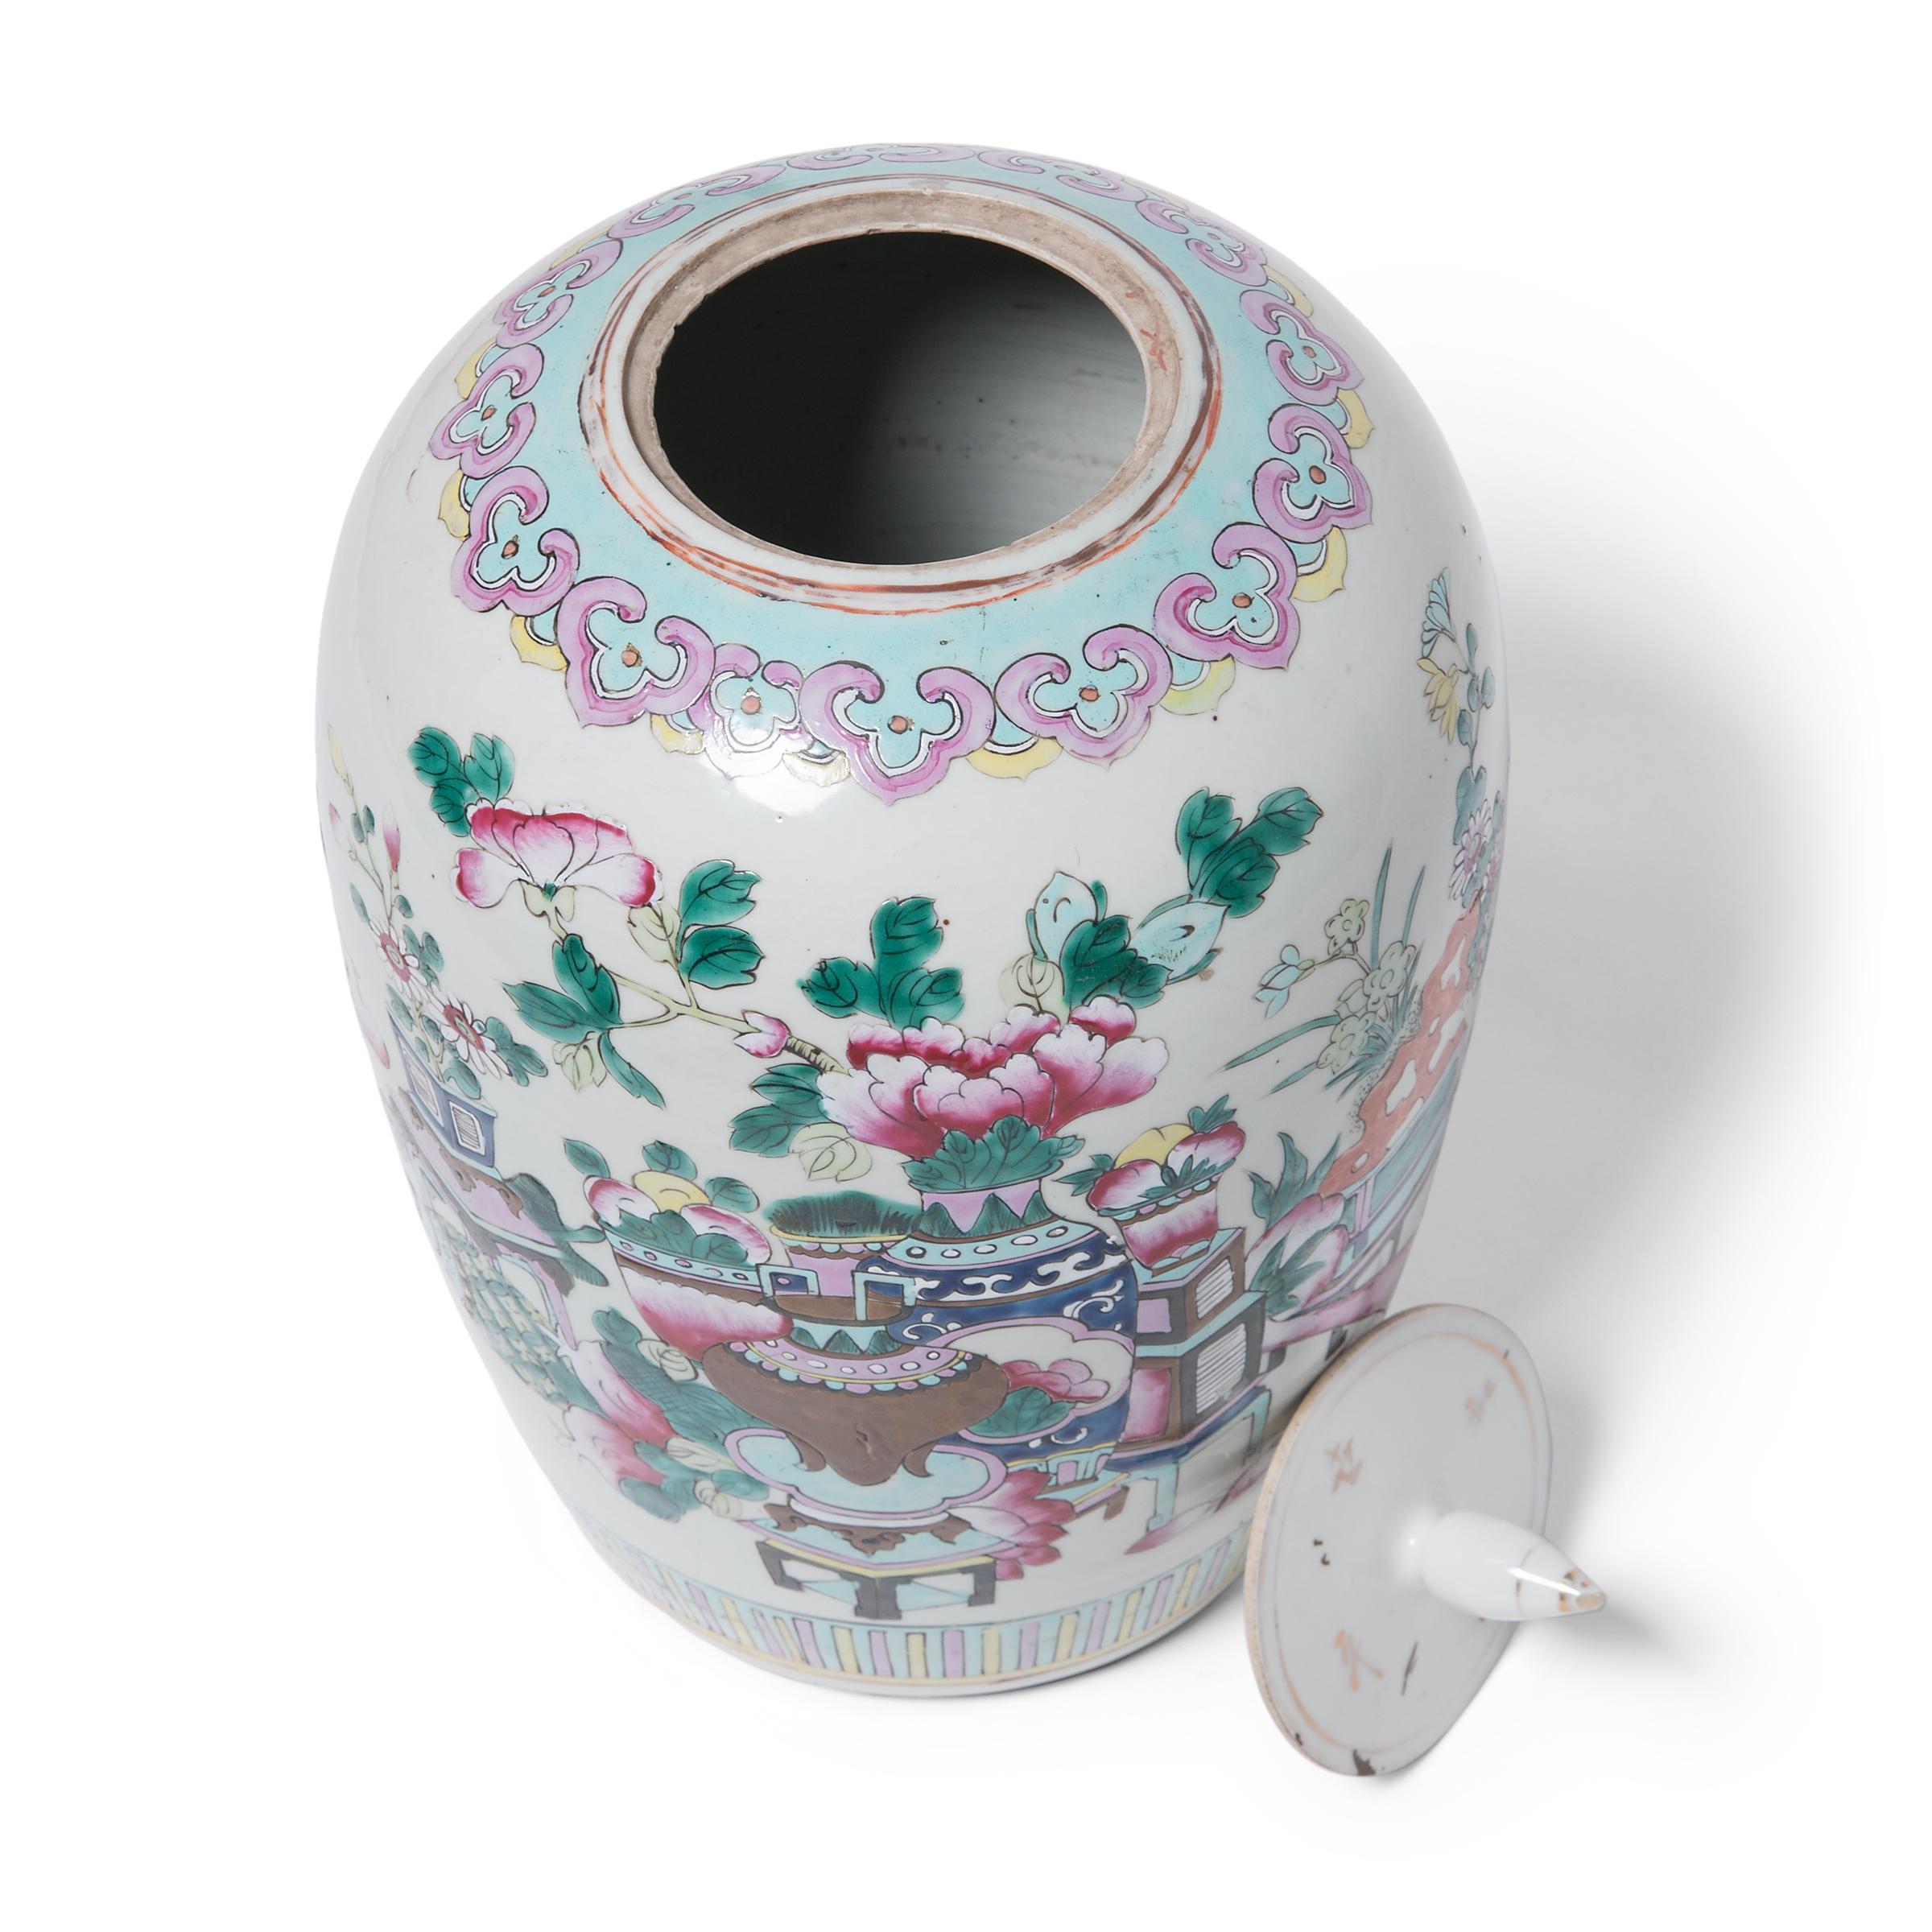 Enamel Chinese Famille Rose Ginger Jar with Fruits and Flowers, circa 1900